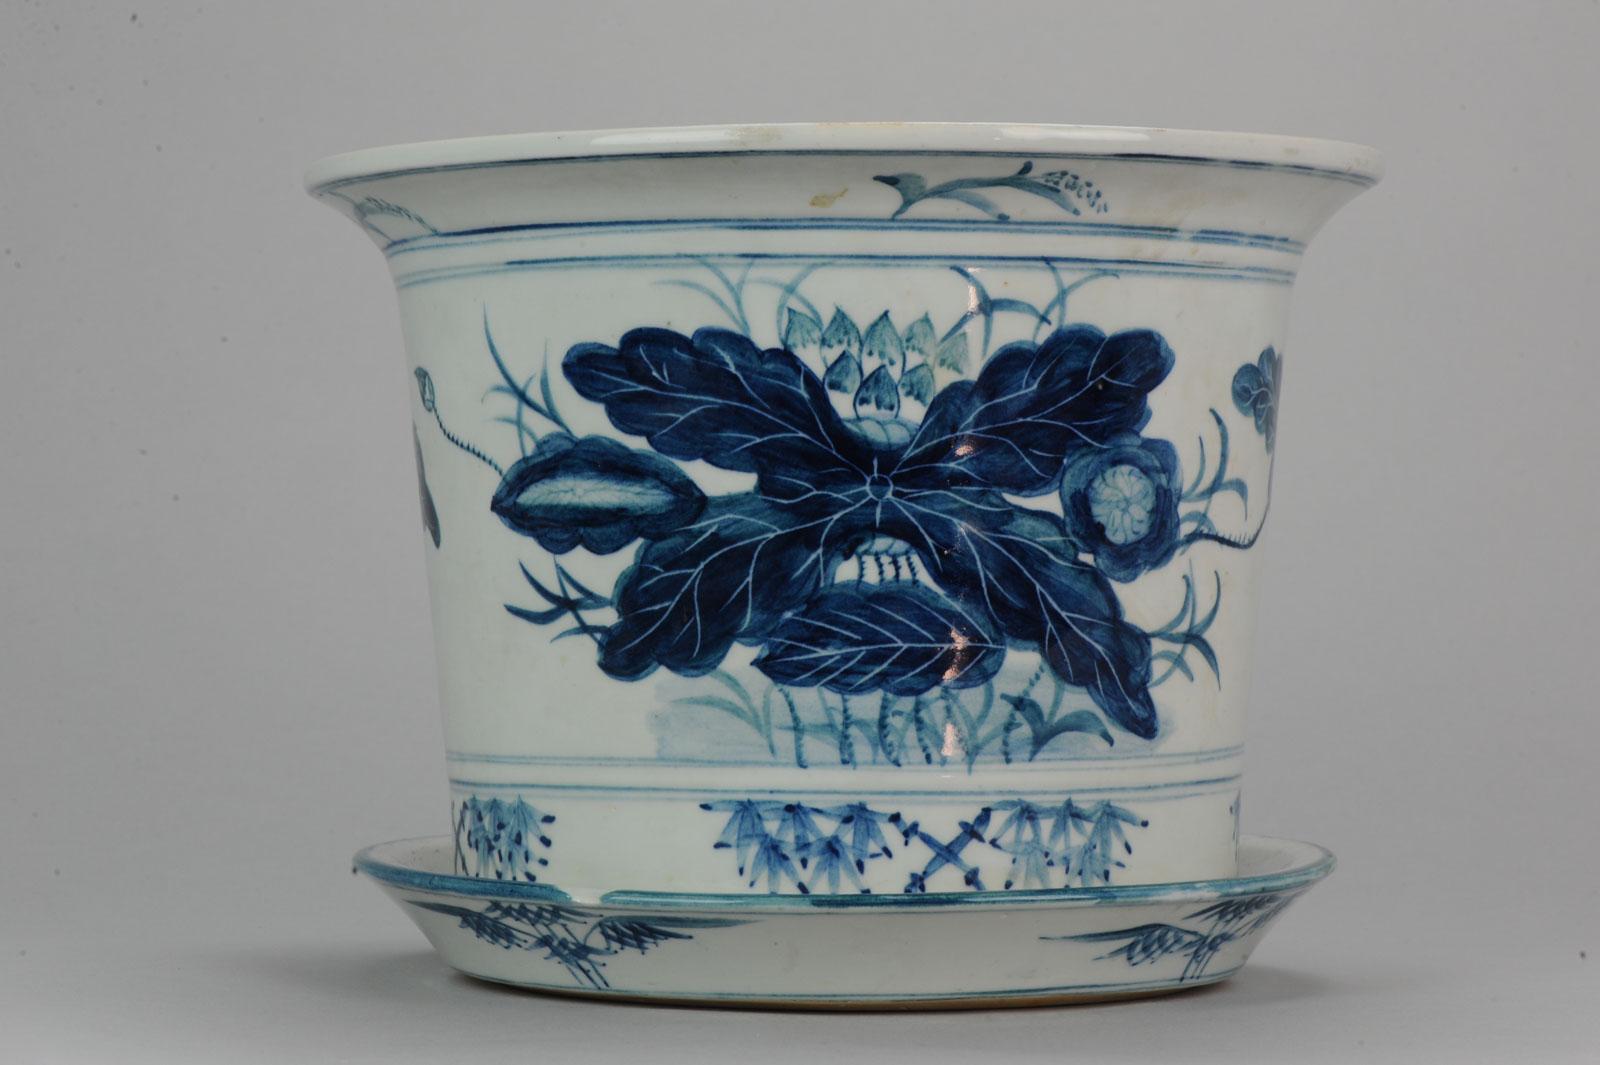 20th Century Chinese Porcelain Jardiniere or Planter for Flower Cabbage Leaf 1